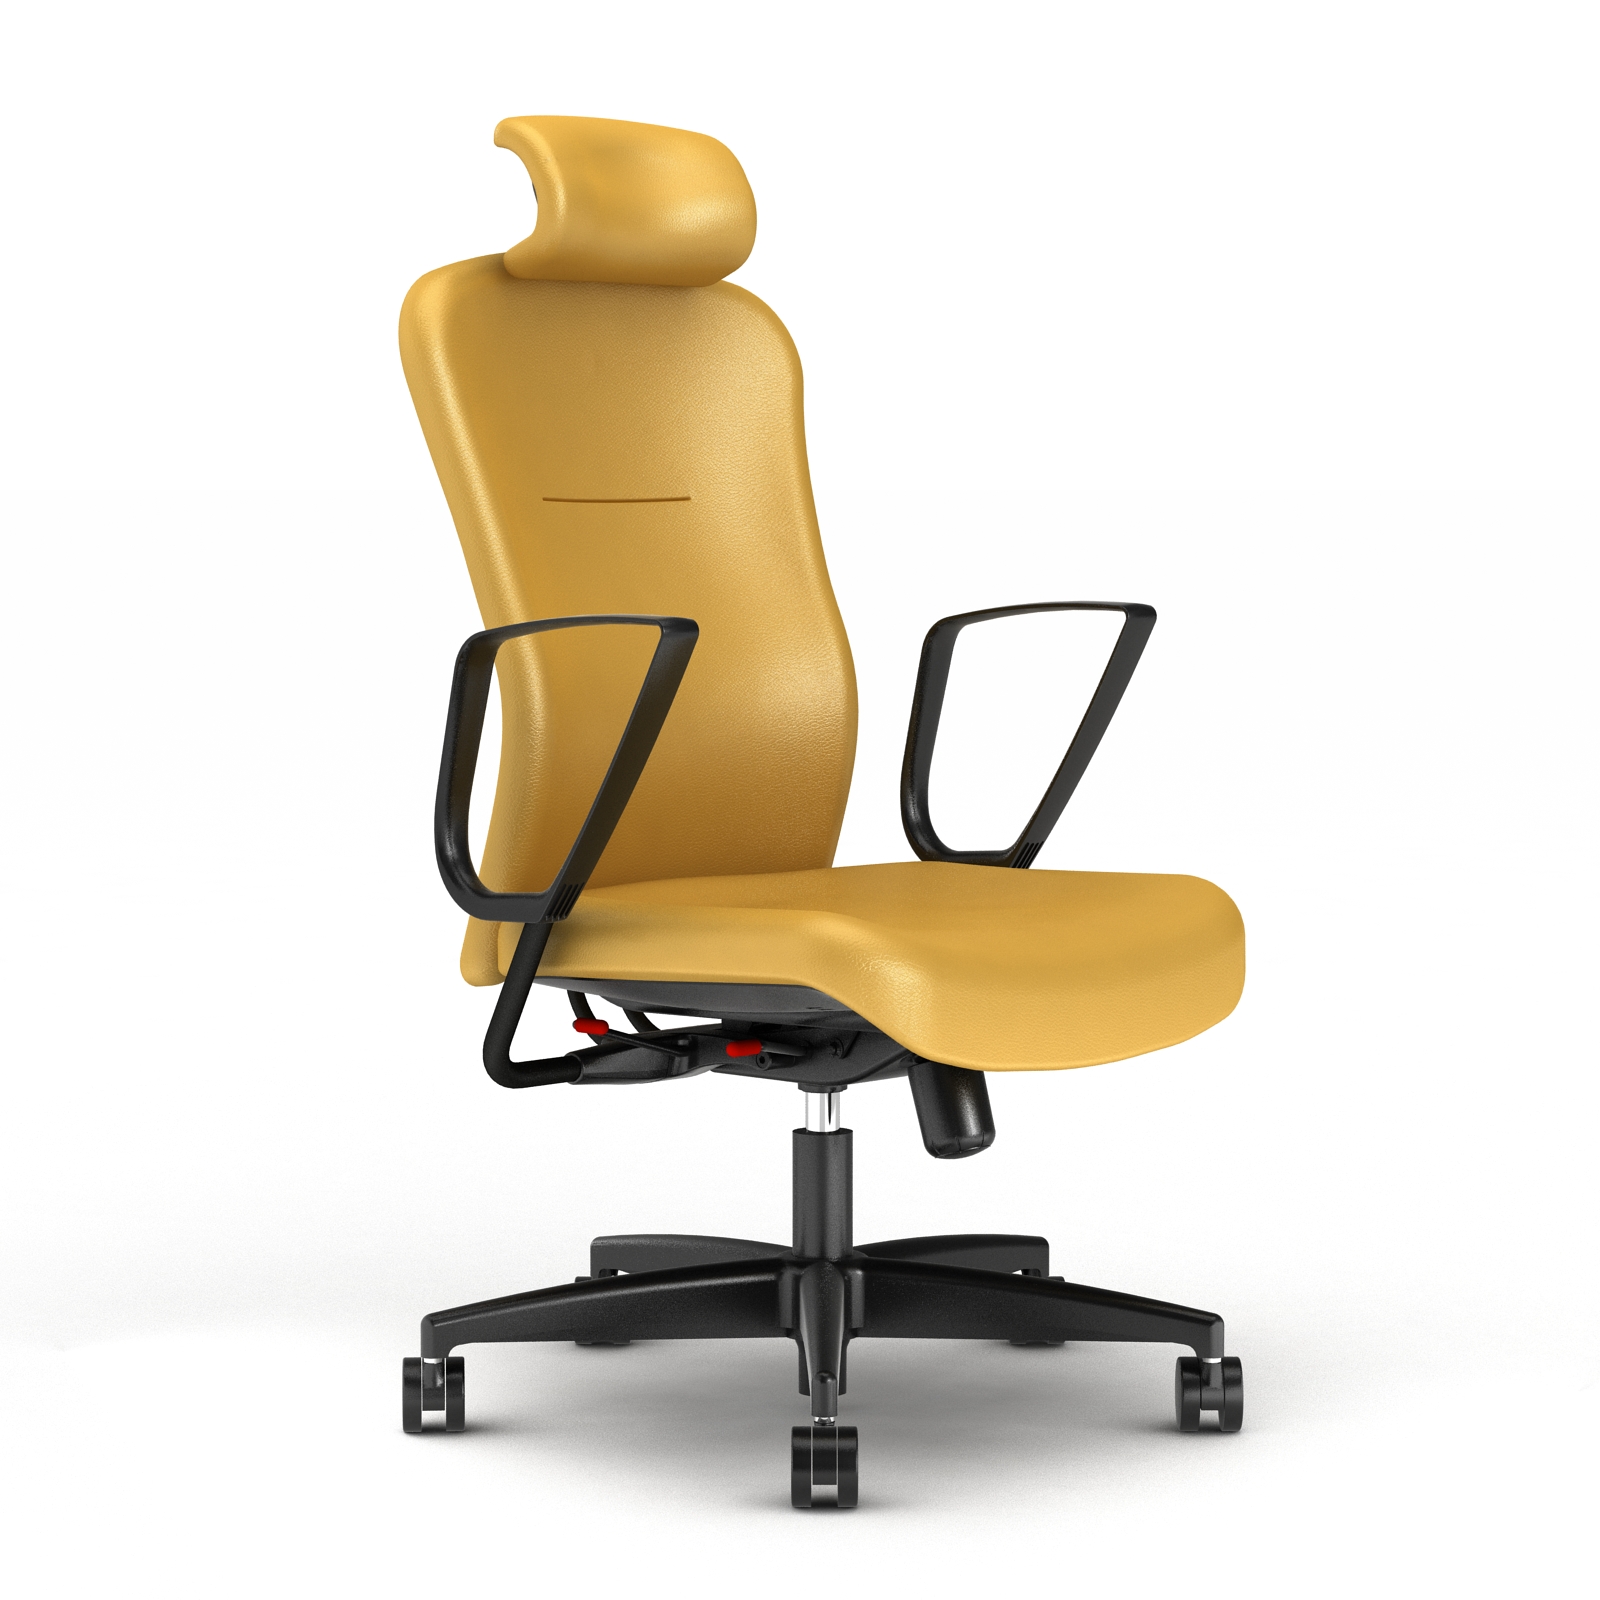 Team chair in yellow PVC leather and 2013 mechanism